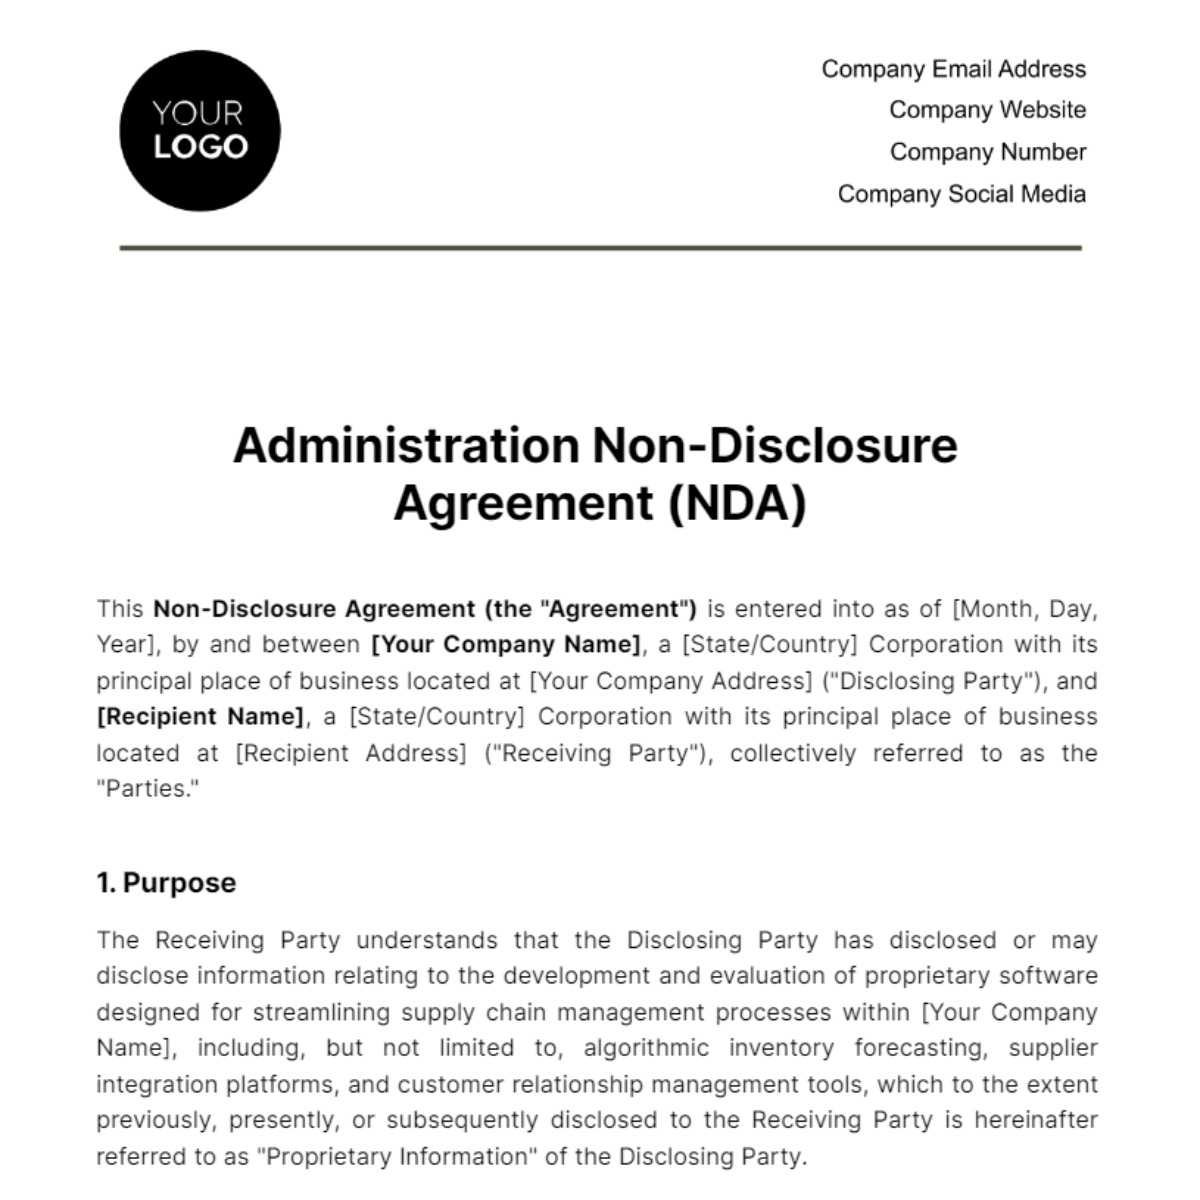 Free Administration Non-Disclosure Agreement (NDA) Template